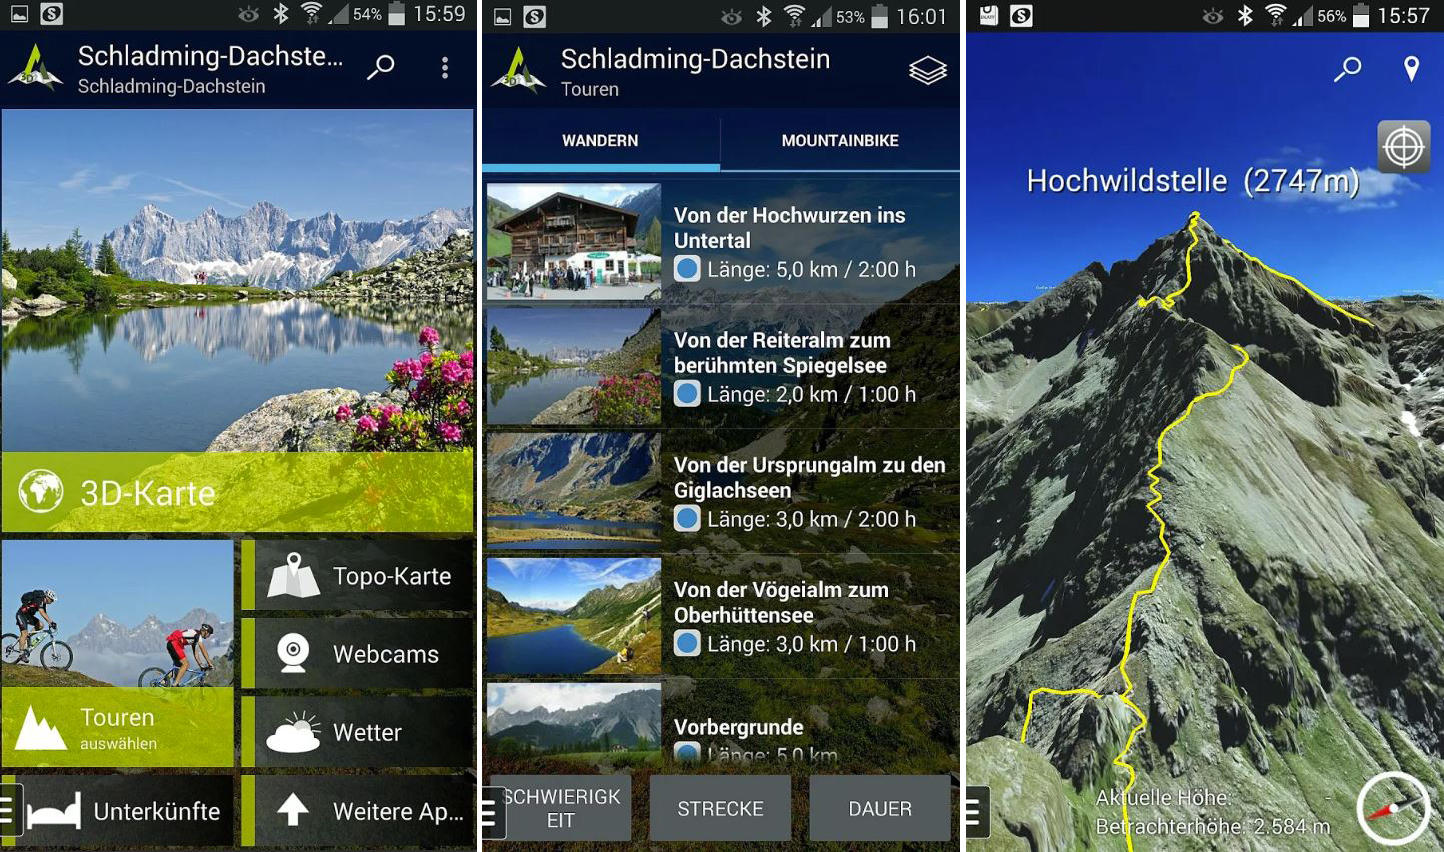 You are currently viewing Schladming-Dachstein in 3D – als App